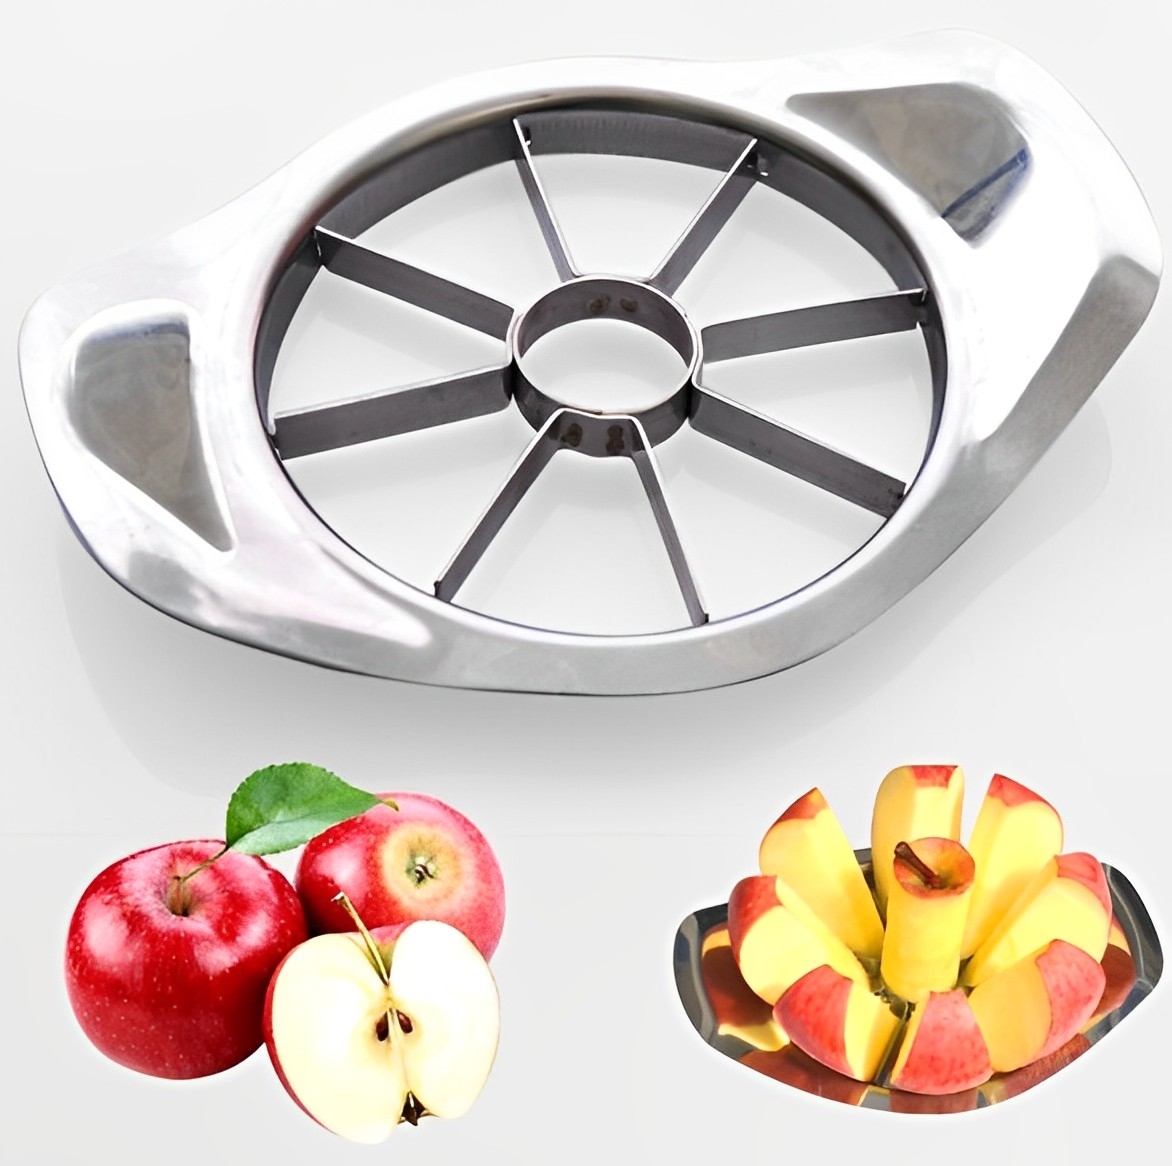 Assorted 21.5 x 14 x 4 cm Tescoma Apple Slicer with Protective Guard “Delícia” 